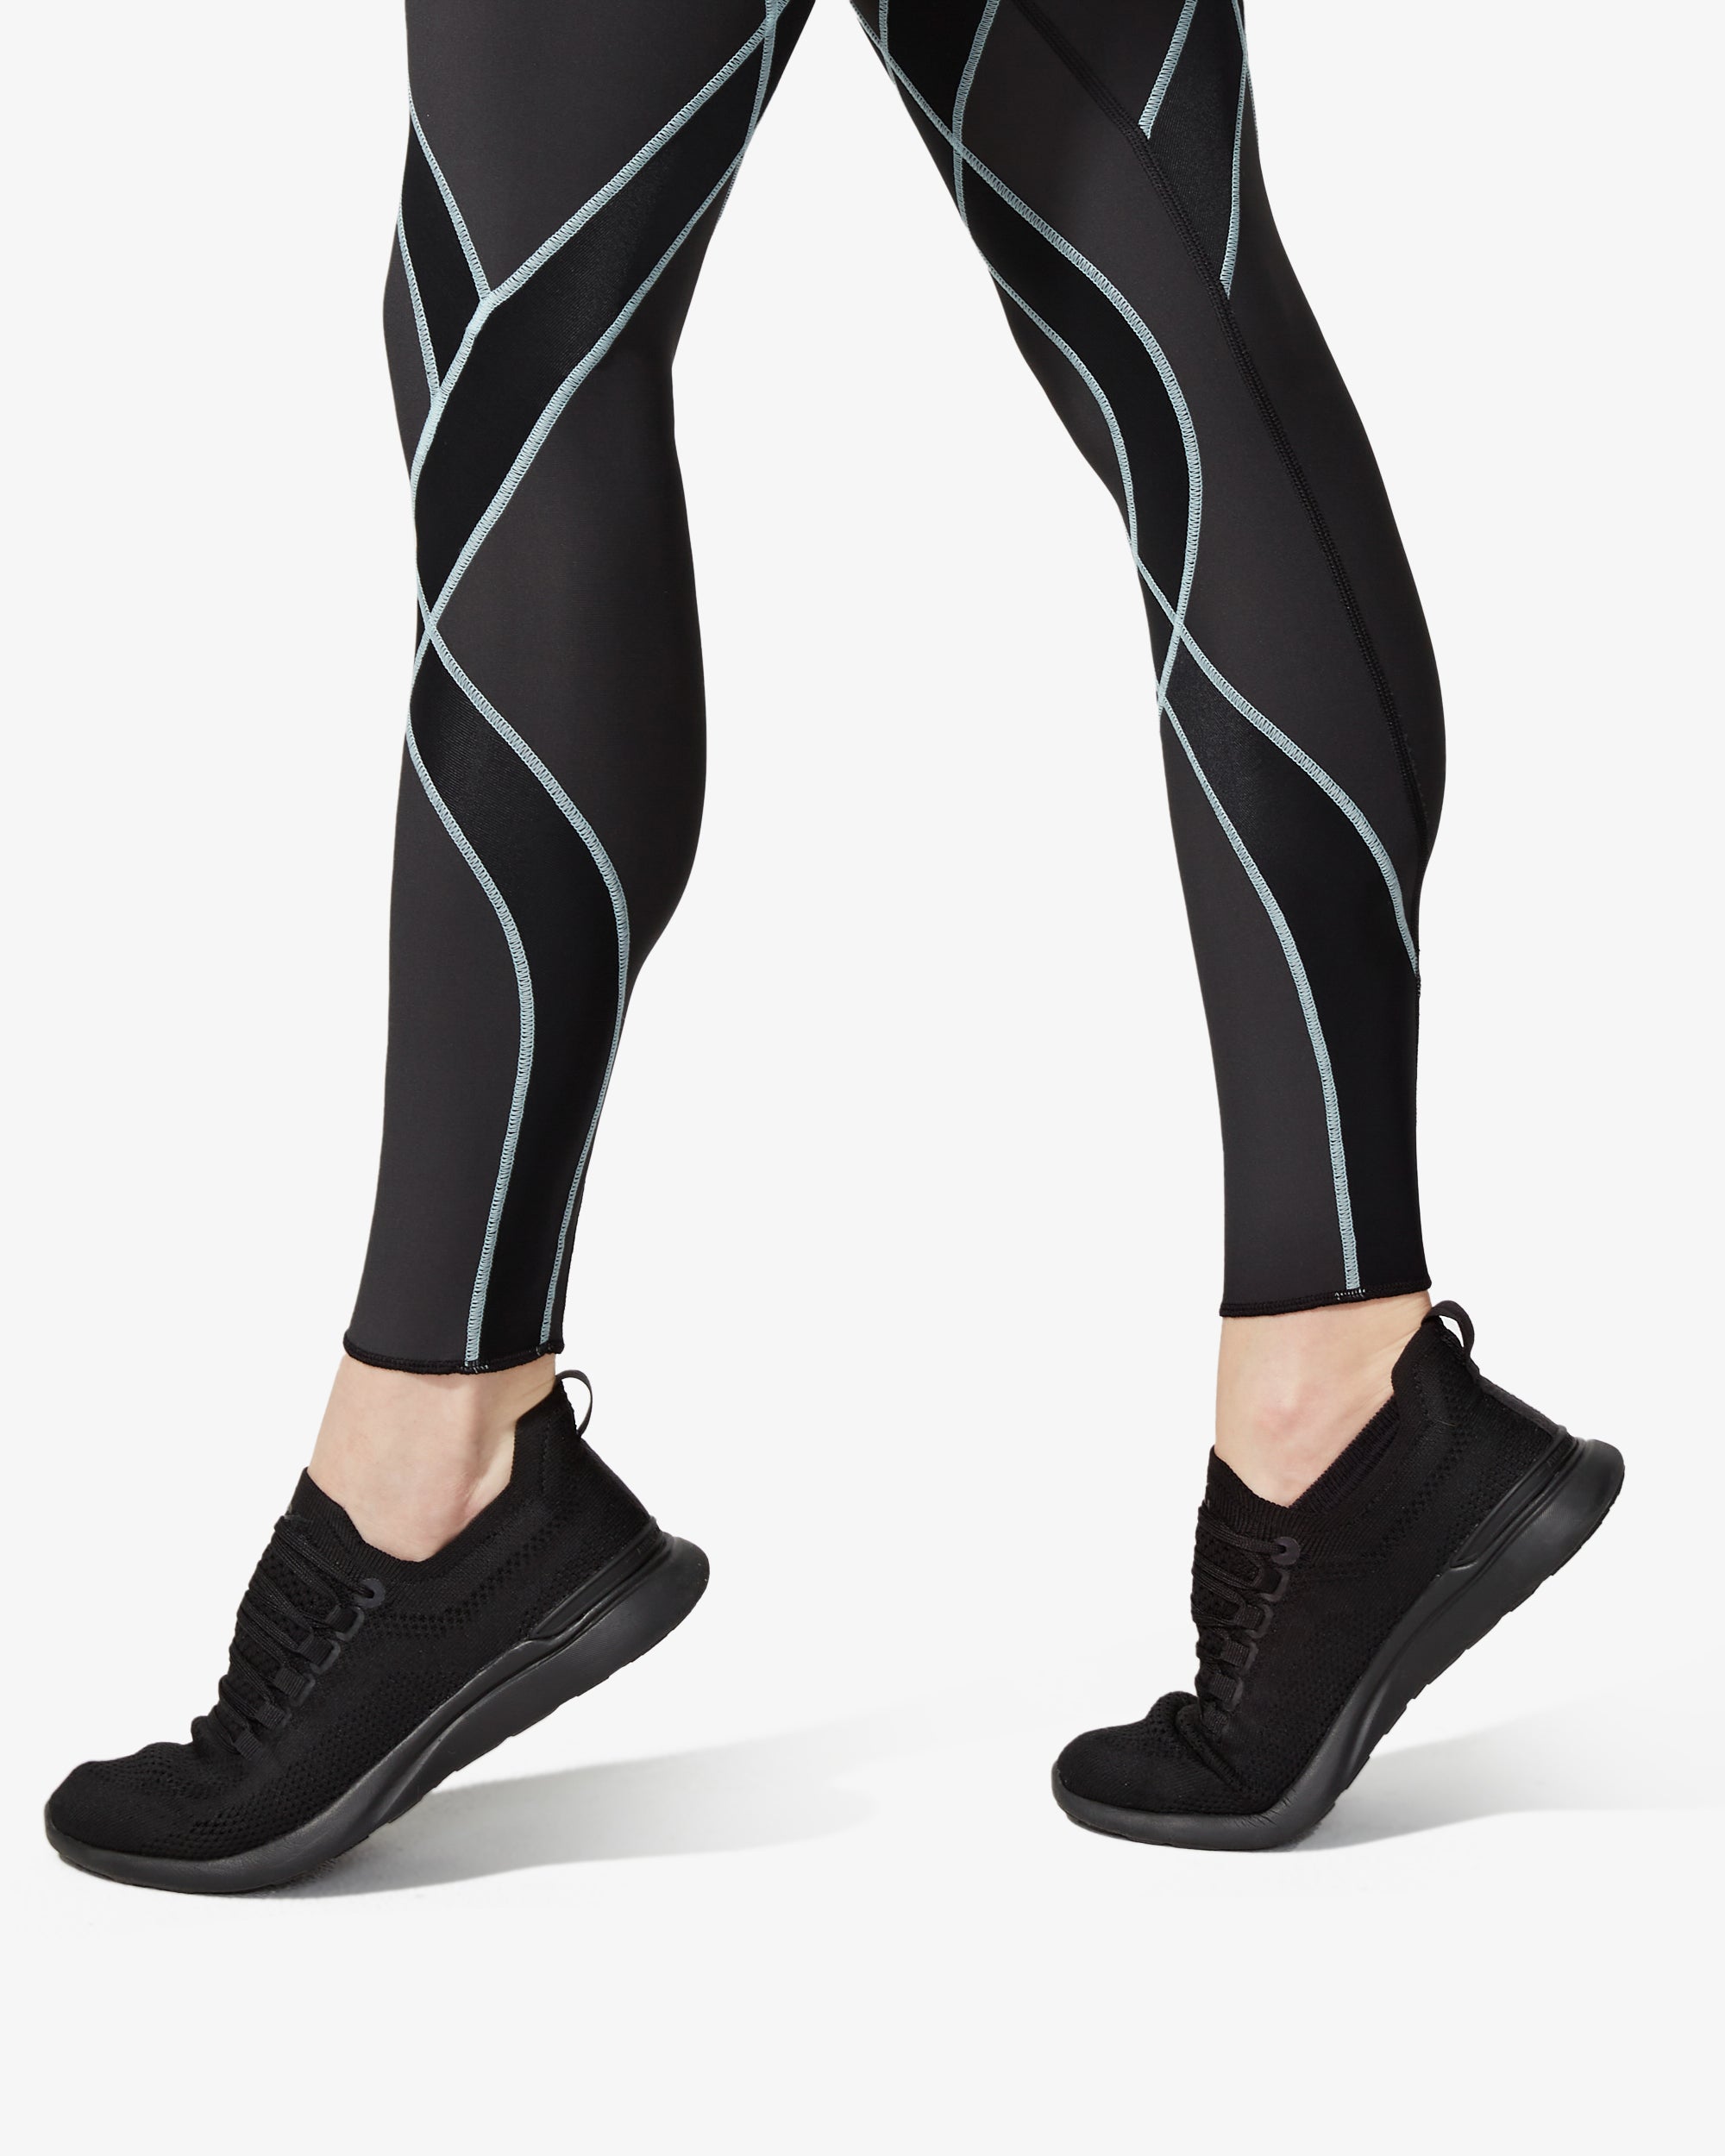 Womens CW-X Endurance Generator Insulator Joint and Muscle Support  Compression Tights & Leggings